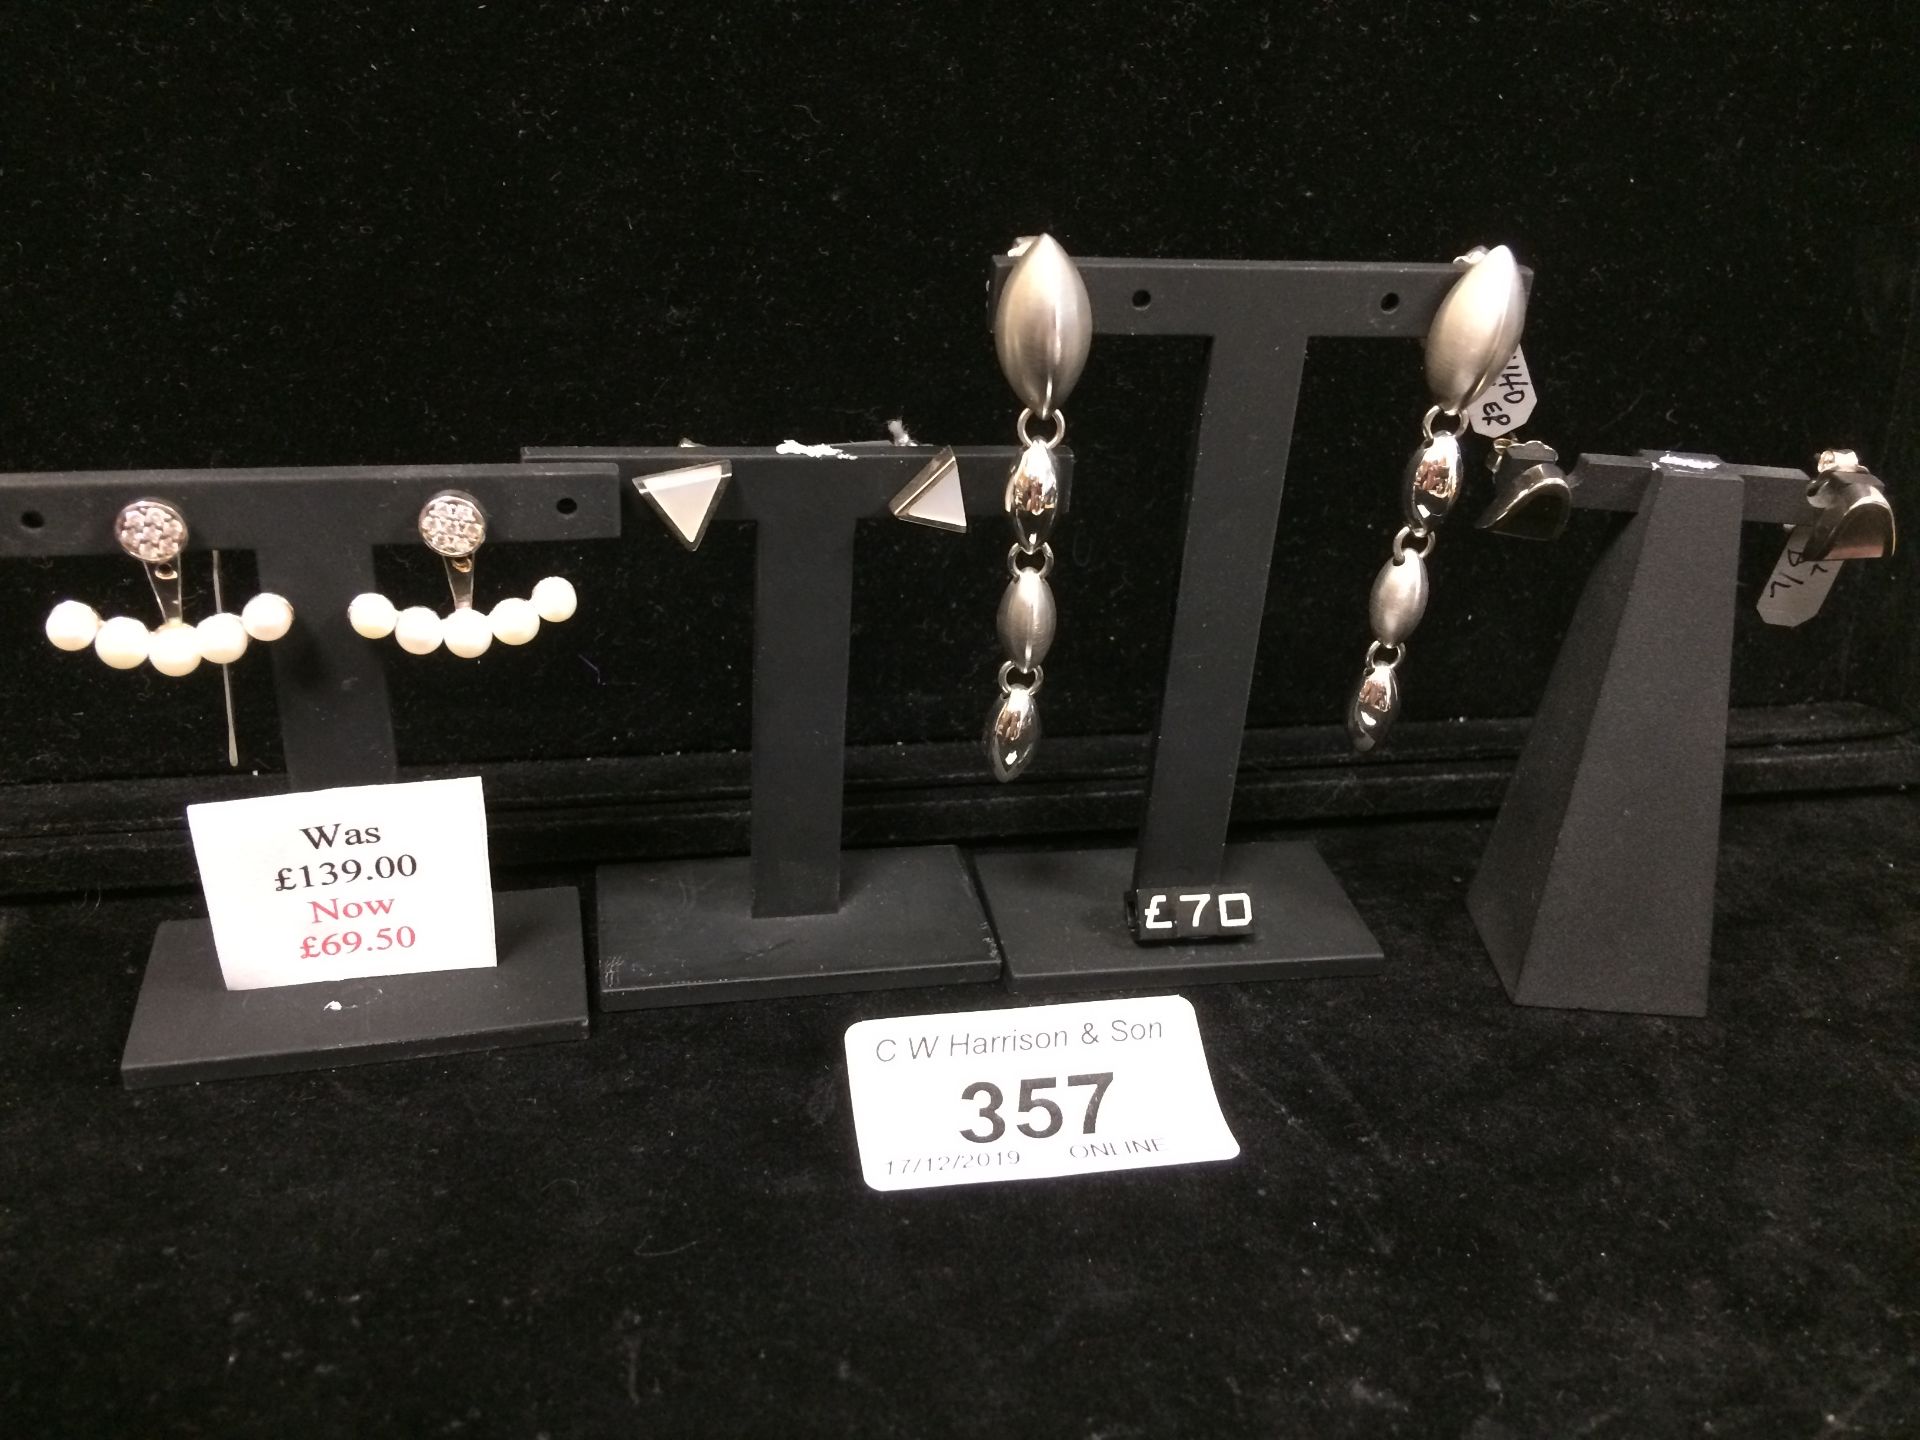 4 x pairs 925 sterling silver earrings RRP £60-£70 each (please note this lot is subject to VAT)